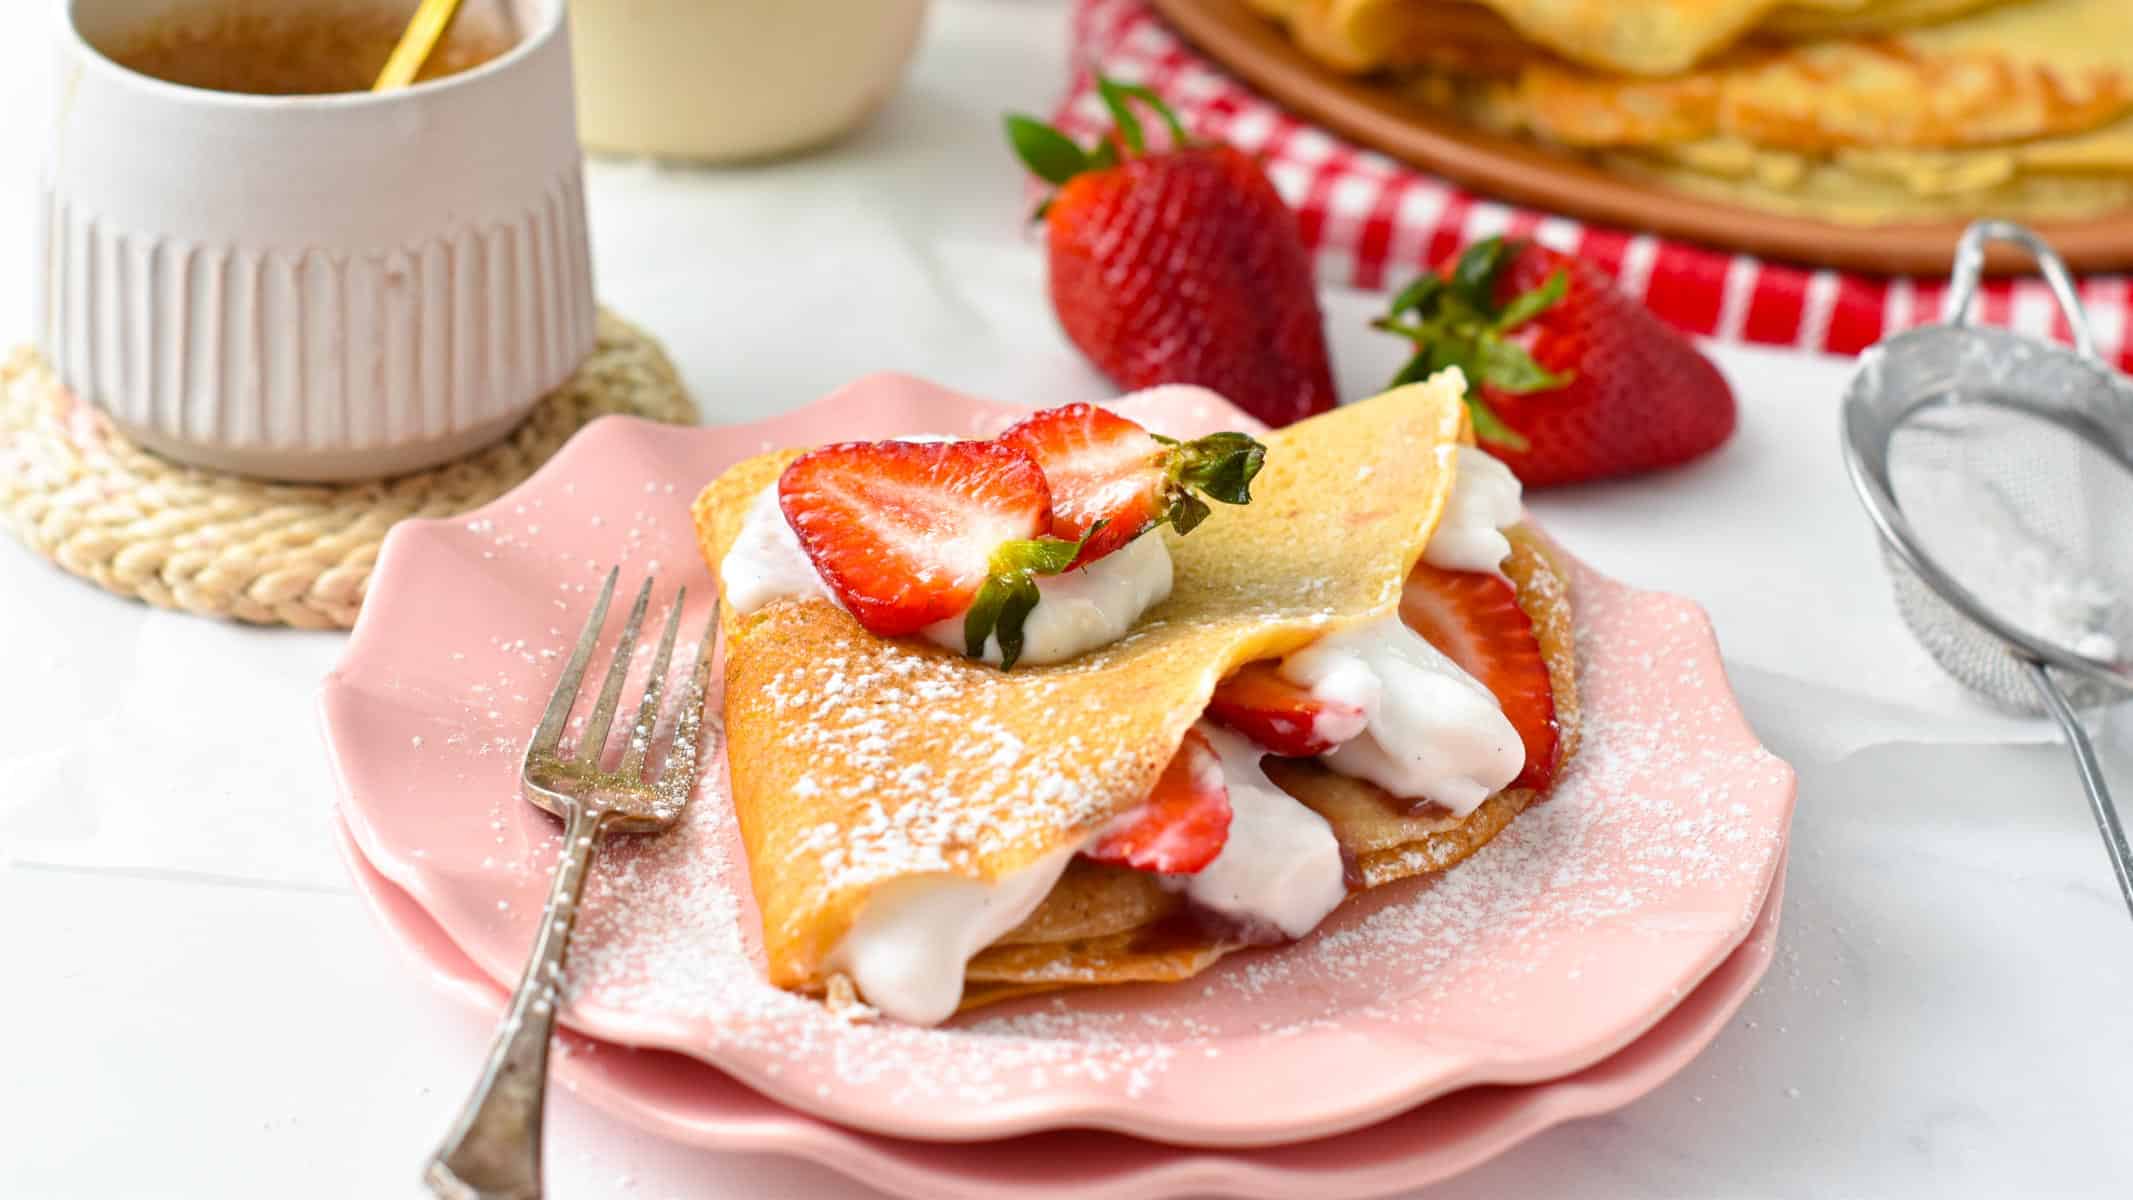 A vegan French crepe filled with strawberries, dairy-free whipped cream on a double pink plate.